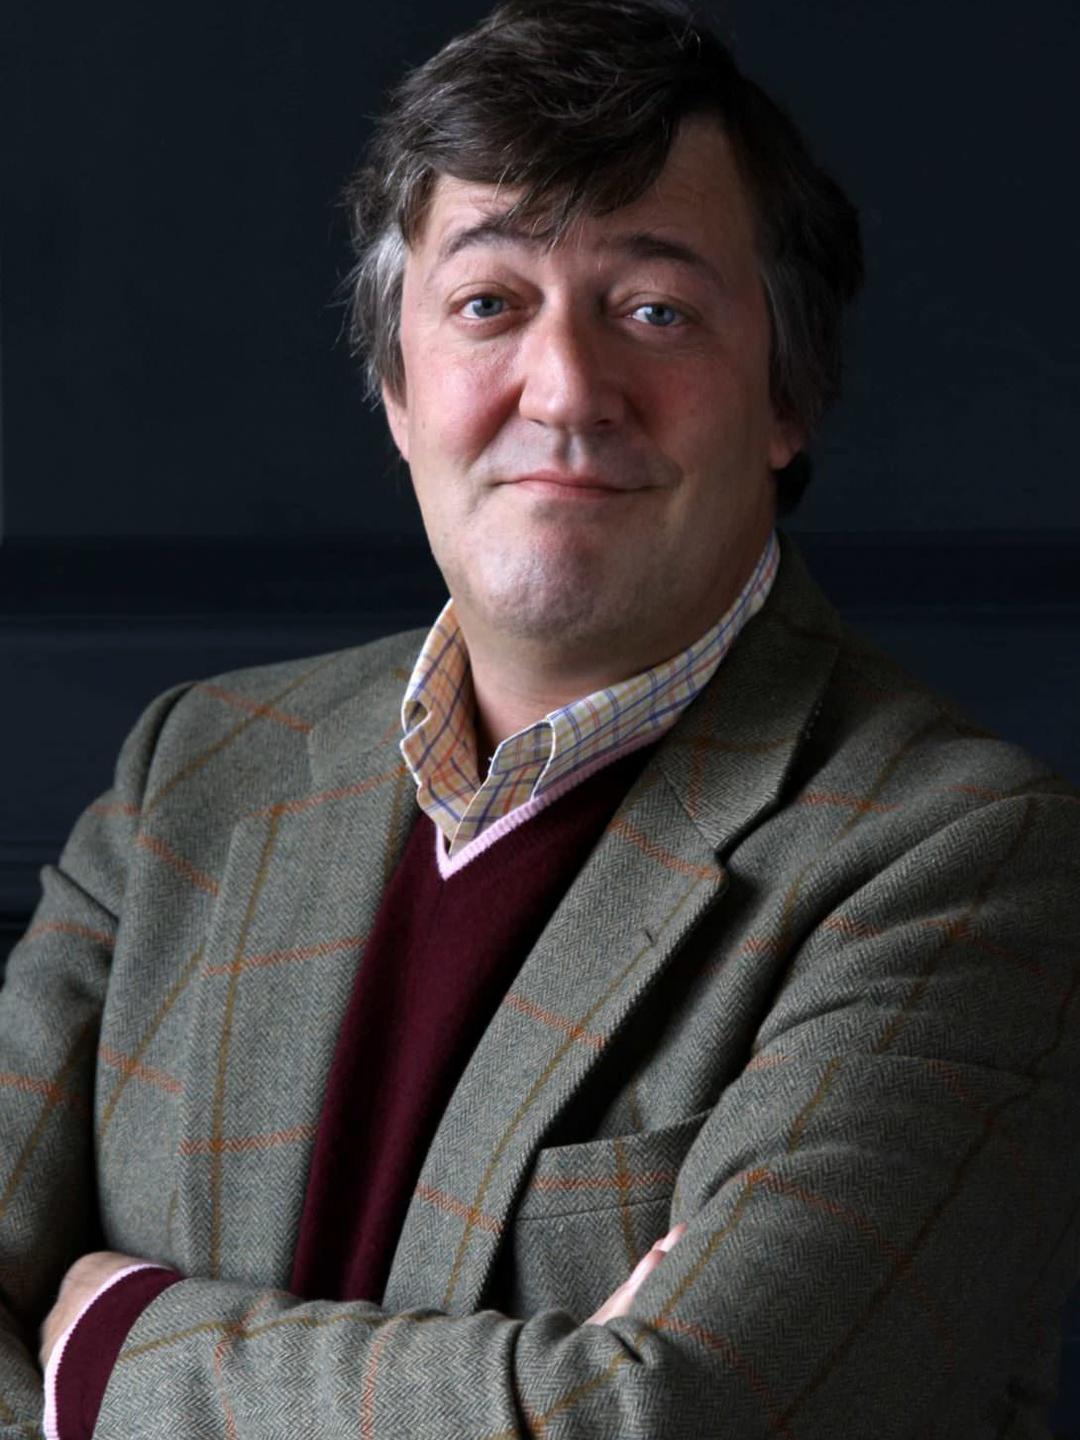 Stephen Fry interesting facts